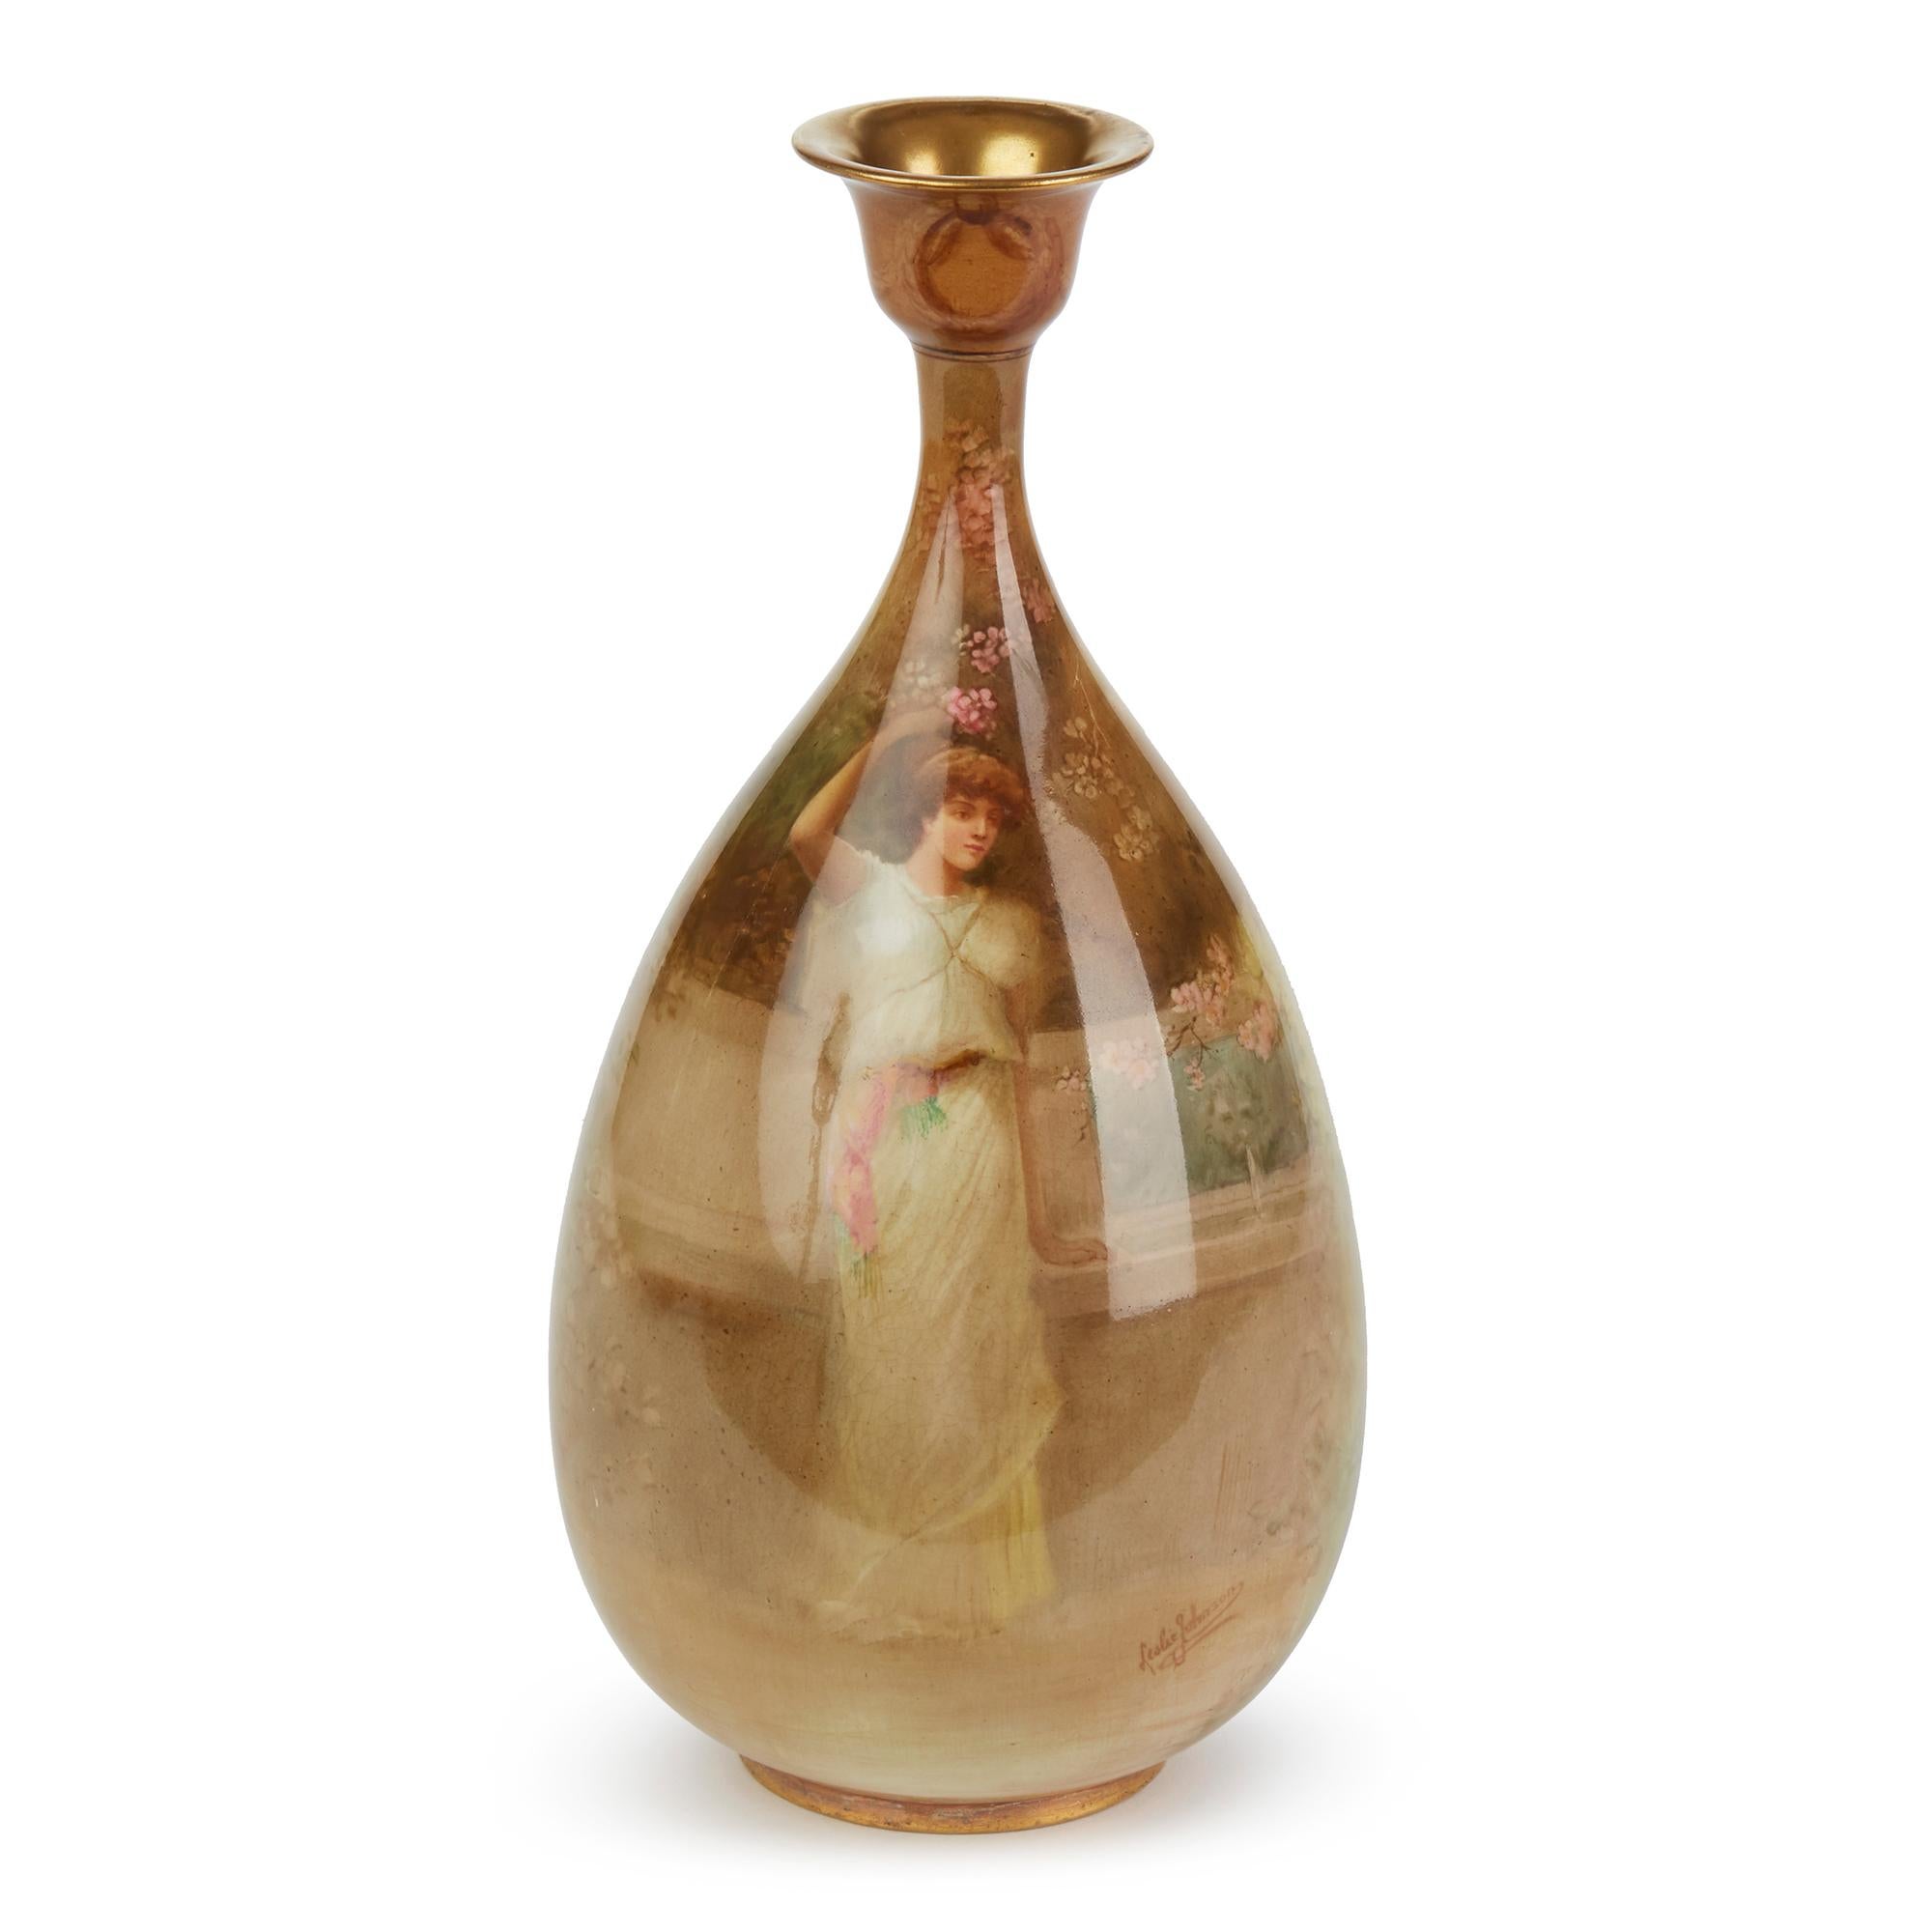 An exceptional and rare Doulton Burslem Luscian ware tear drop shaped vase handpainted by renowned miniature and historical artist Leslie Johnson dating between 1891 and 1902. The tall and elegantly shaped vase has a large body with slender neck and